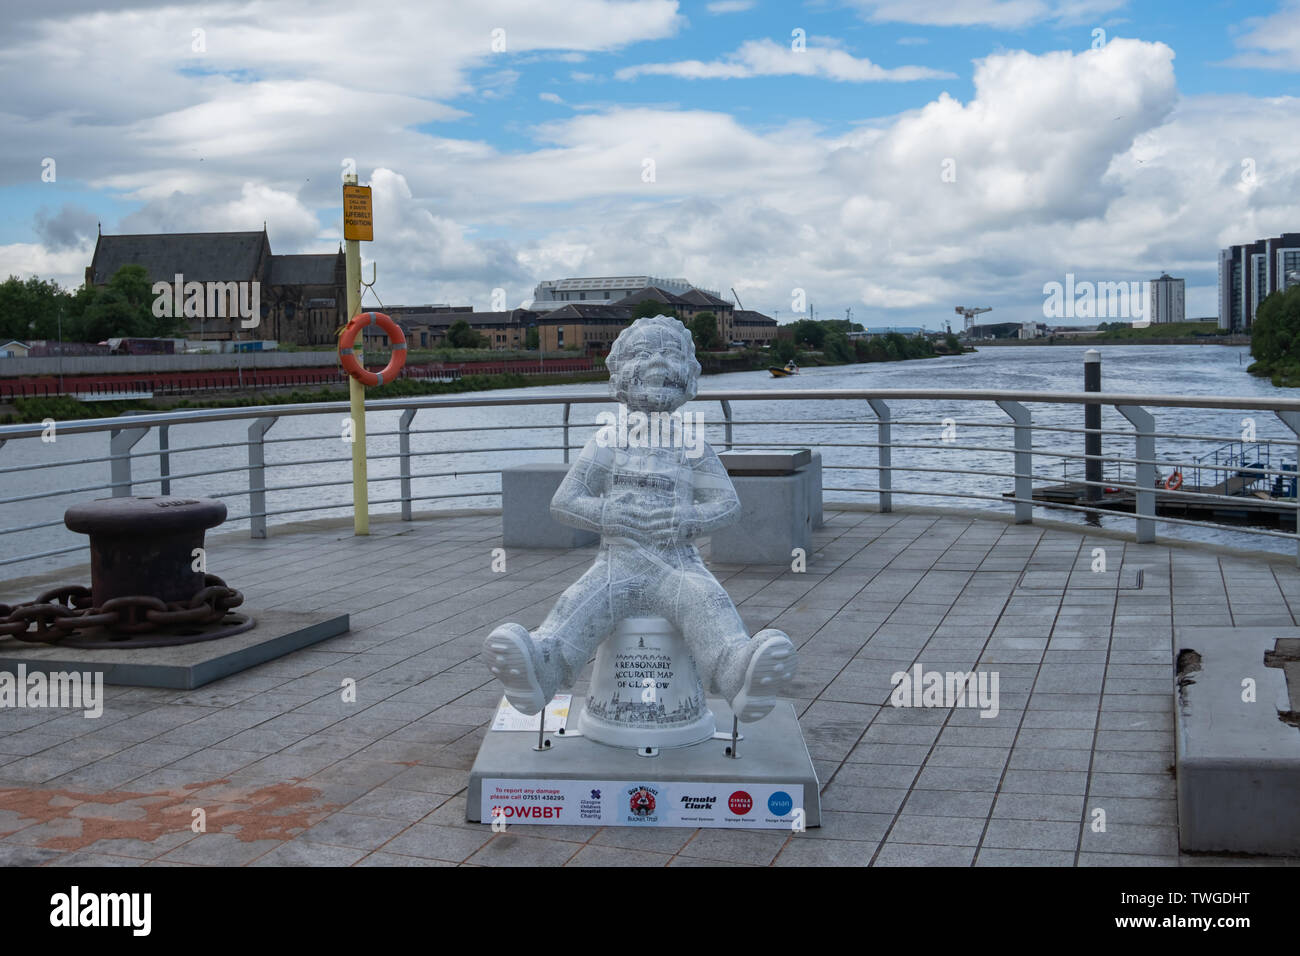 Glasgow, Scotland, UK. 20th June, 2019. A reasonably Accurate Map of Glasgow, created by Adrian McMurchie. This scupture adorns Oor Wullie in an illustrated map of Glasgow including some of the city's most famous buildings and quirky text to accompany them.  The sculpture is part of Oor Wullie’s BIG Bucket Trail. Credit: Skully/Alamy Live News Stock Photo